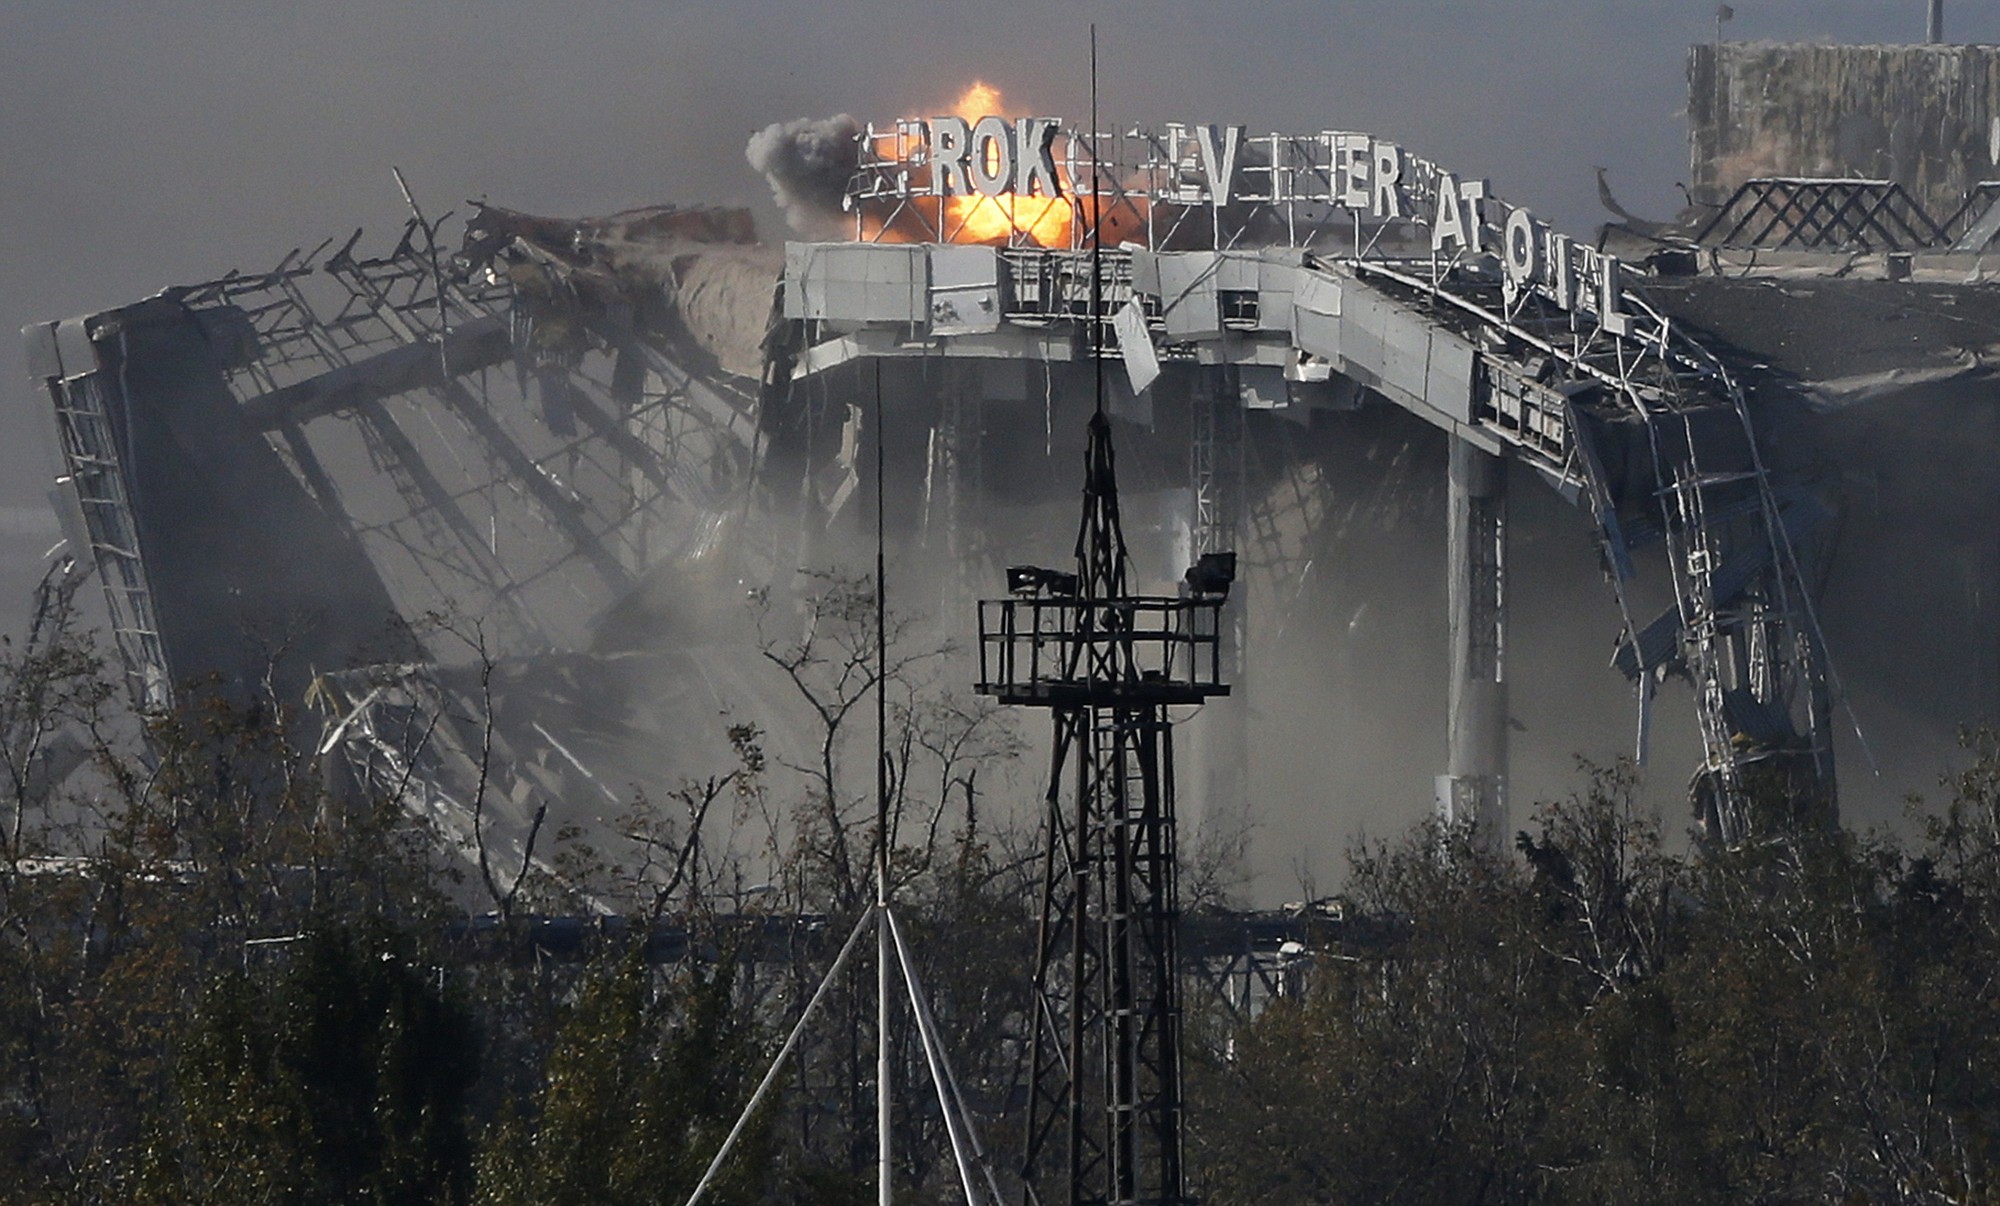 The main terminal of Donetsk Sergey Prokofiev International Airport is hit by shelling  Wednesday during fighting between pro-Russian rebels and Ukrainian government forces in Donetsk, Ukraine.